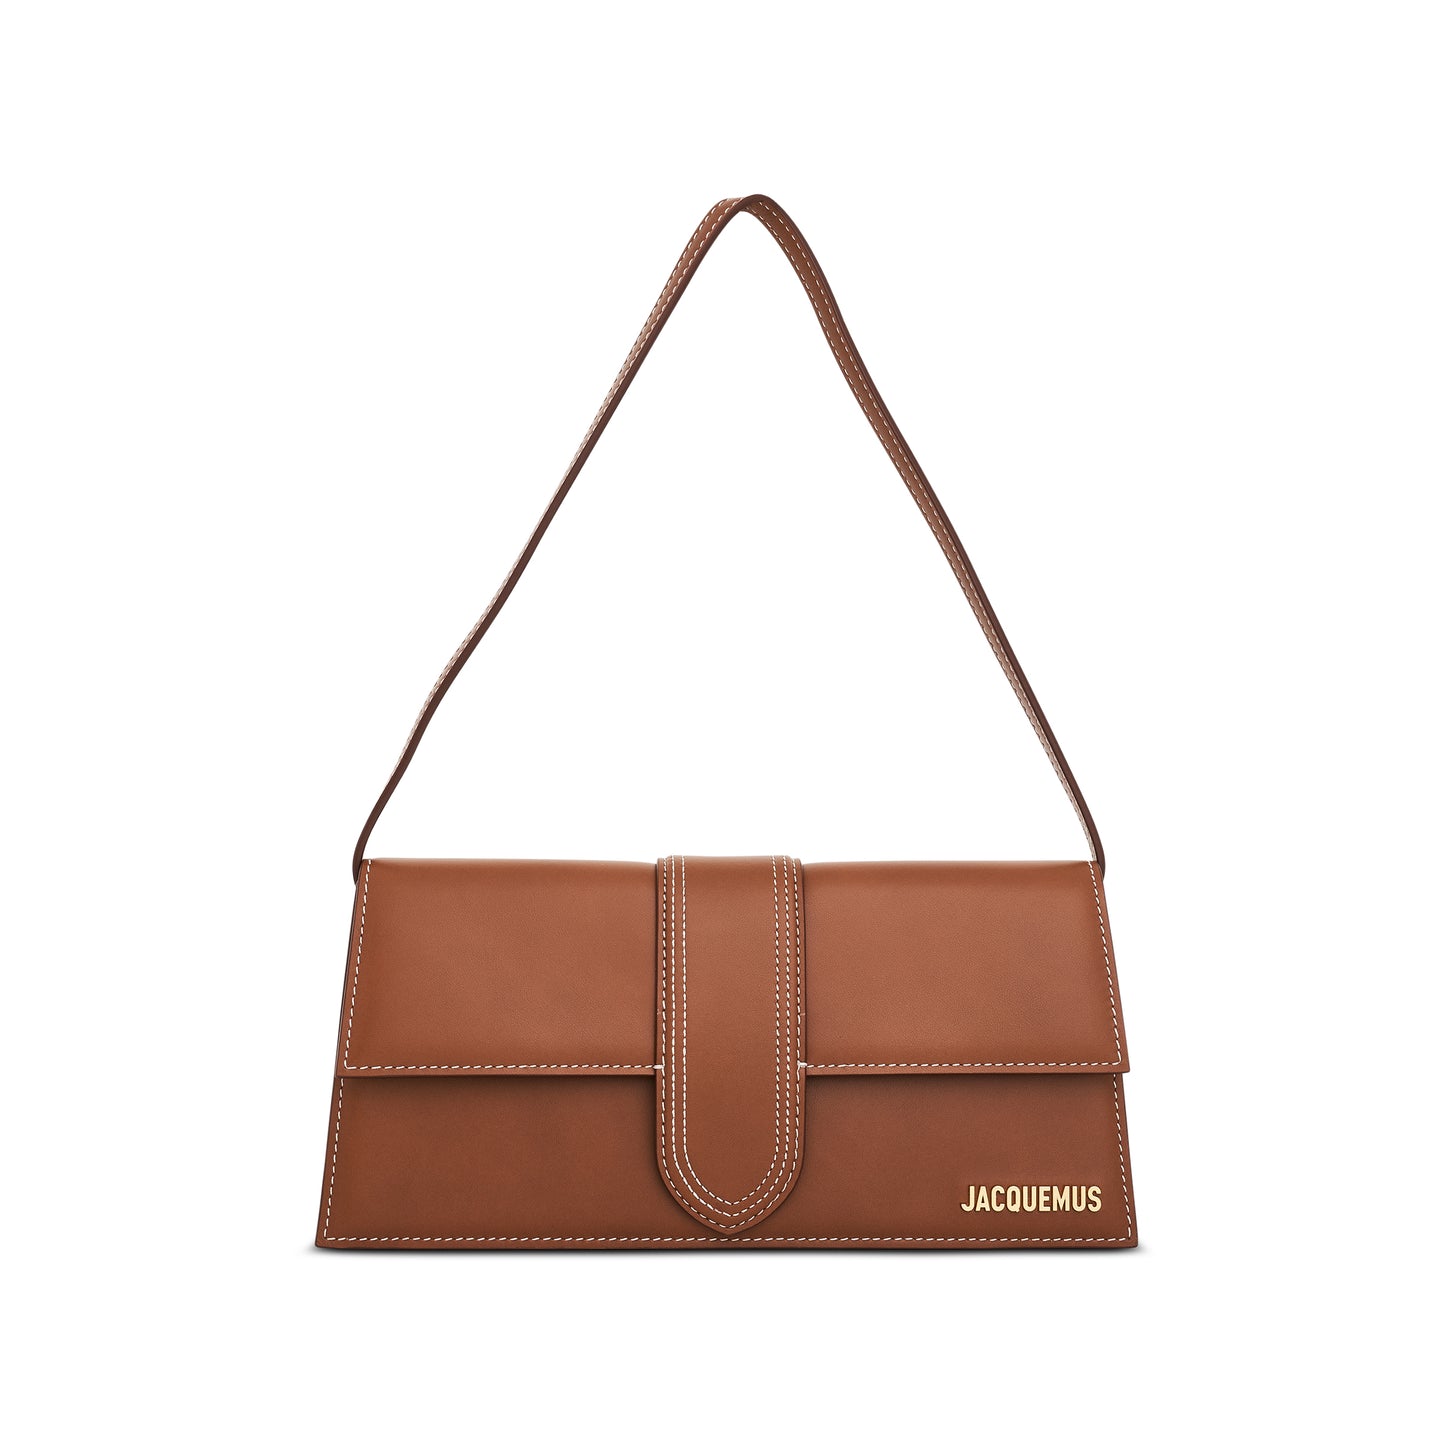 Le Bambino Long Leather Bag in Light Brown 2